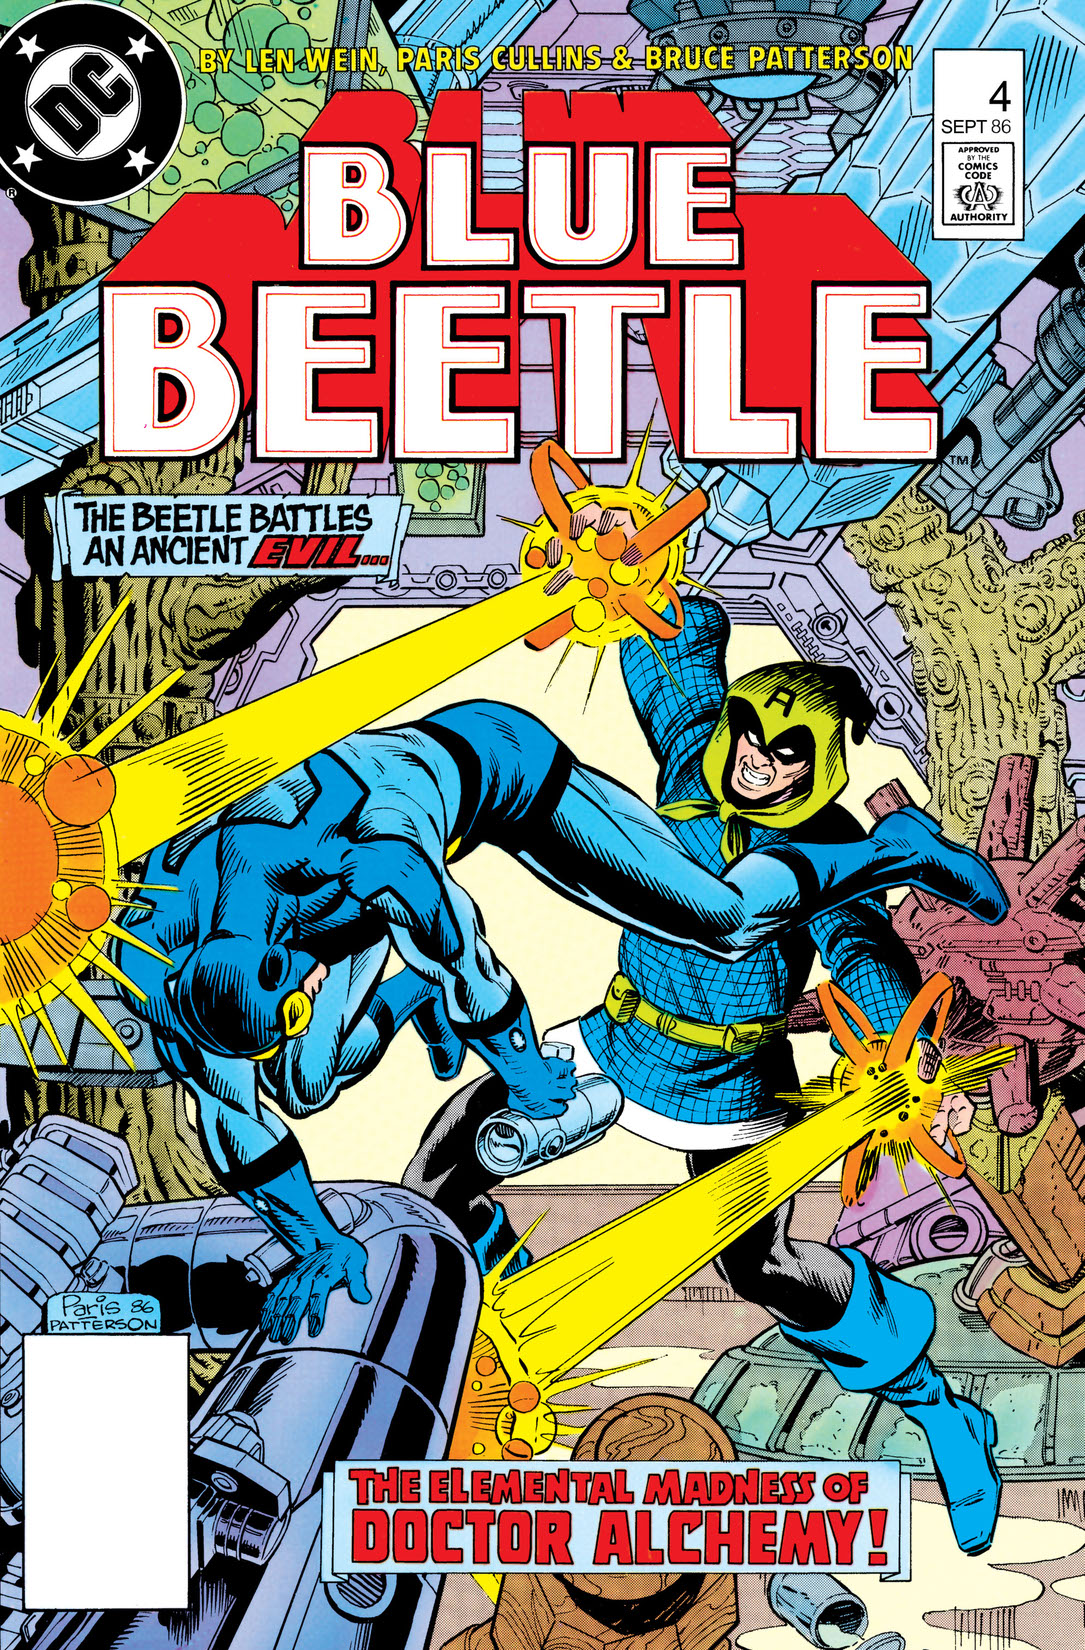 Blue Beetle (1986-) #4 preview images